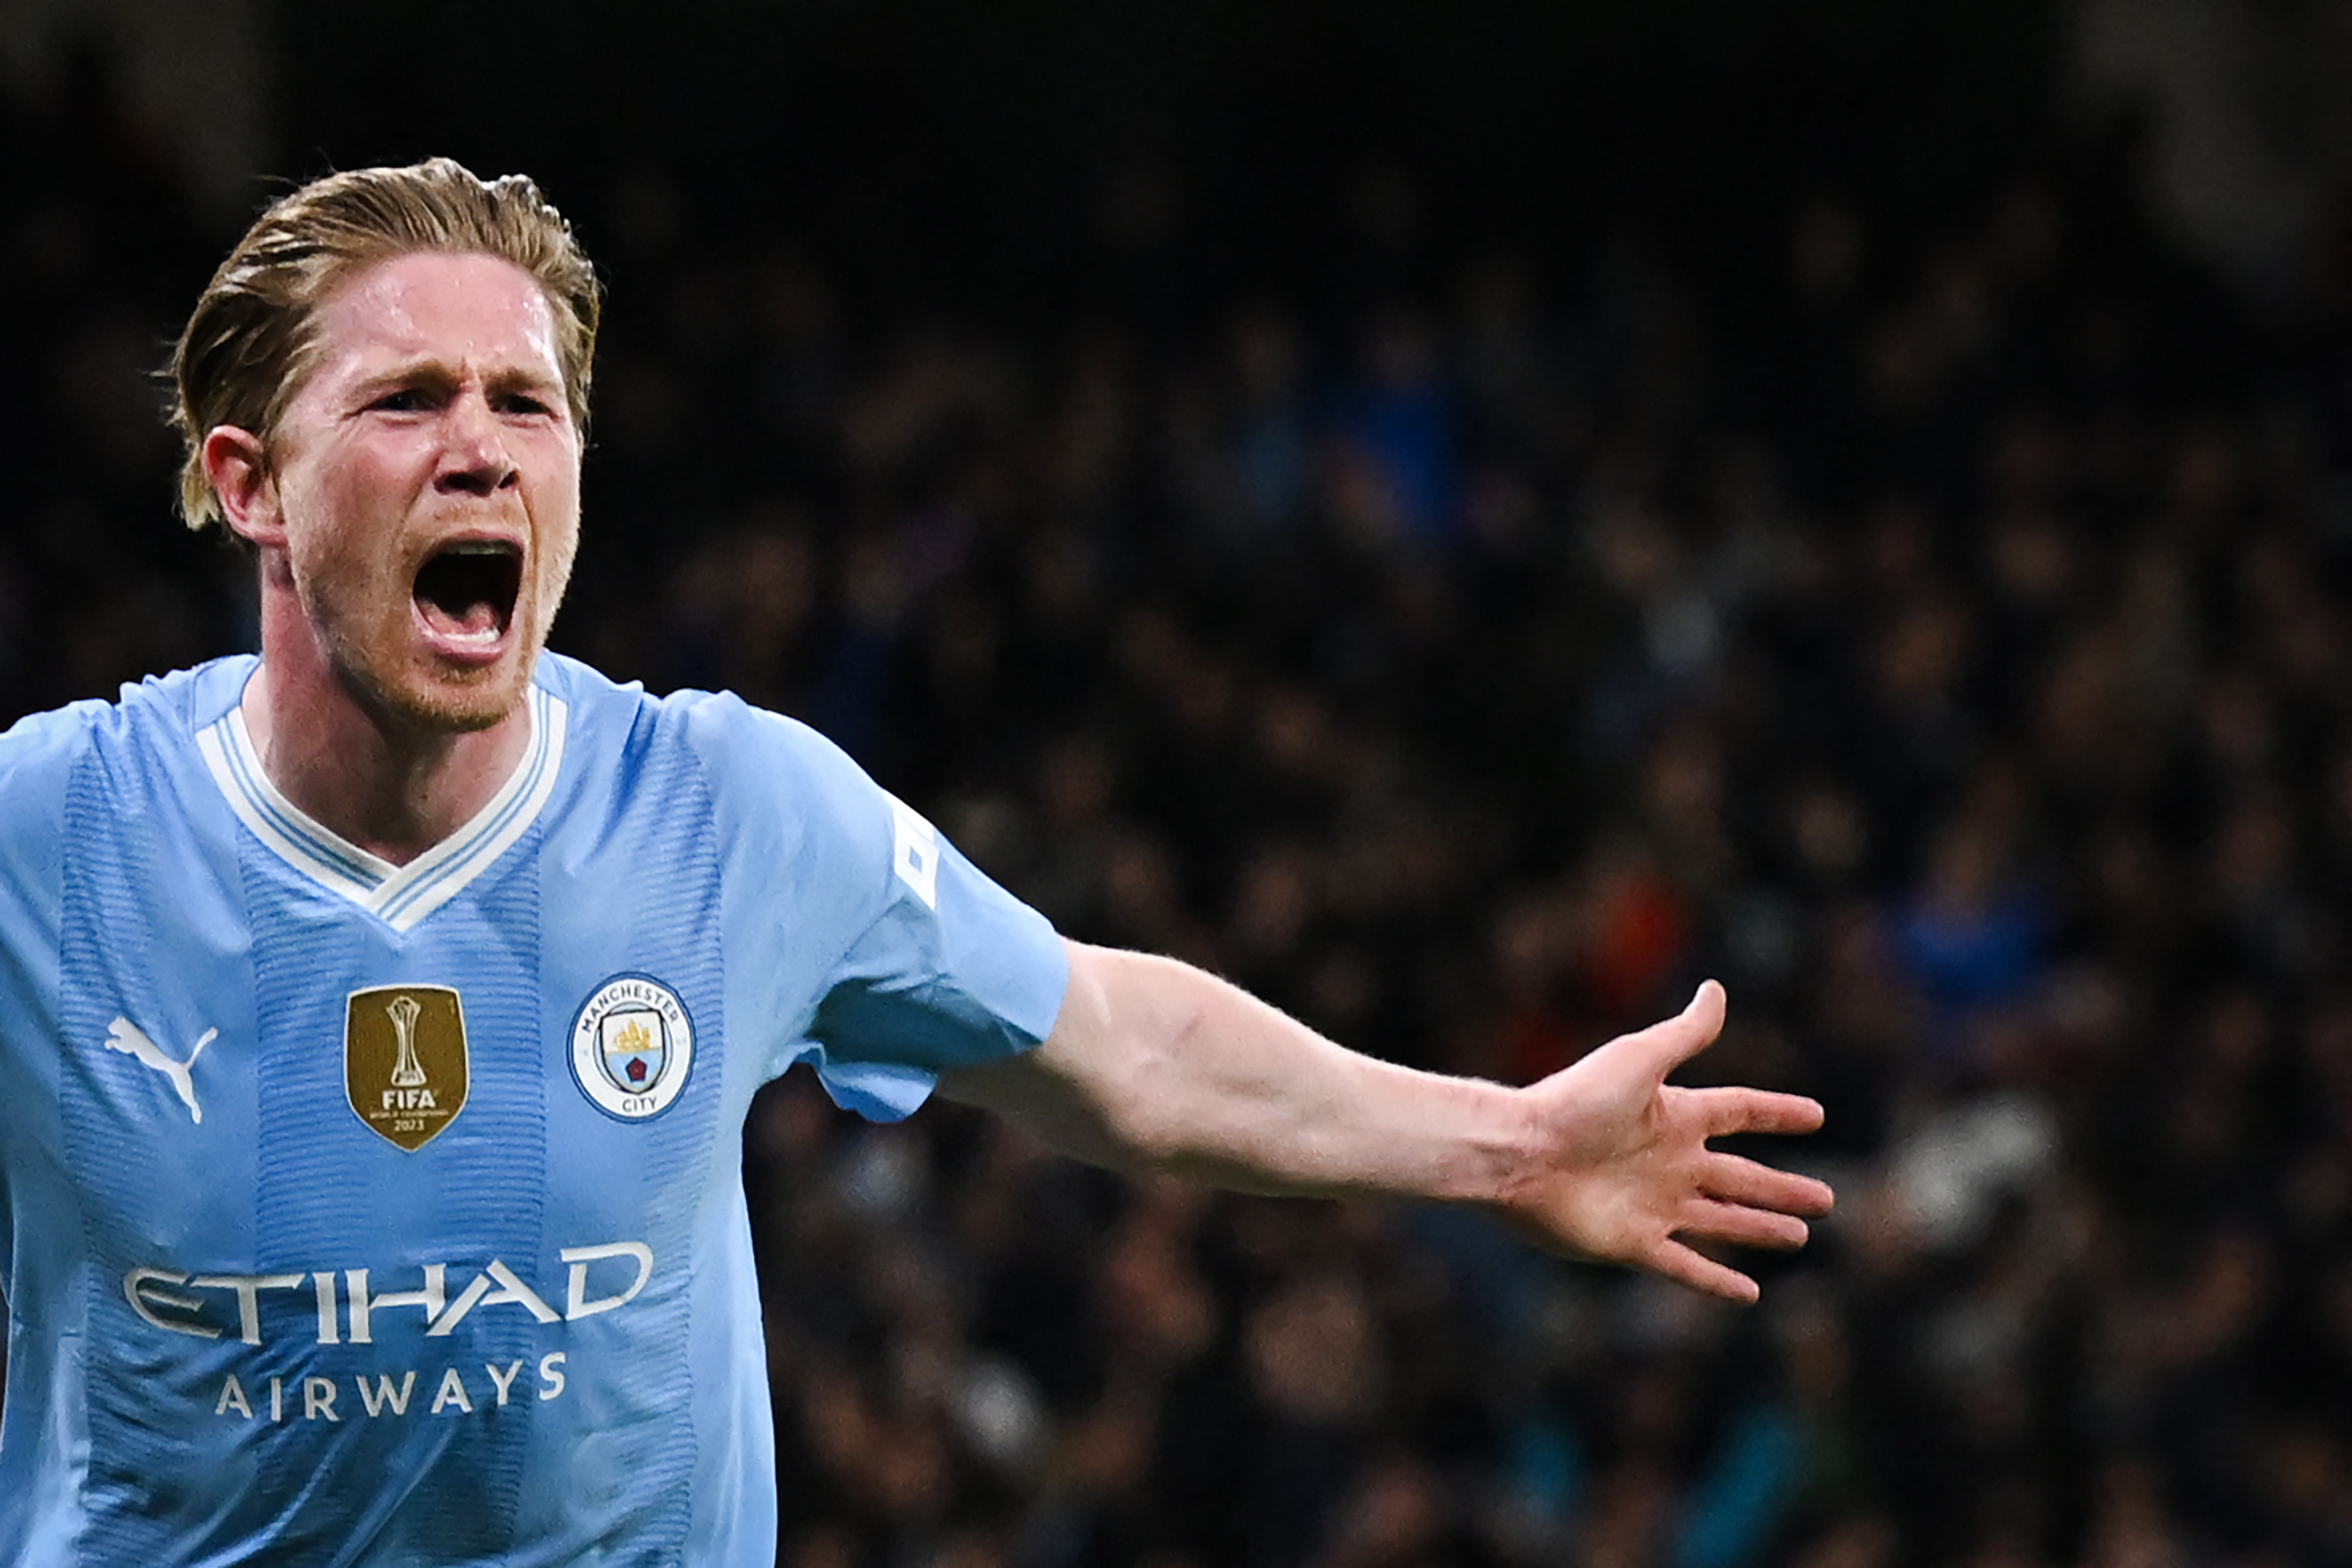 San Diego FC are making an audacious swoop for Kevin De Bruyne.